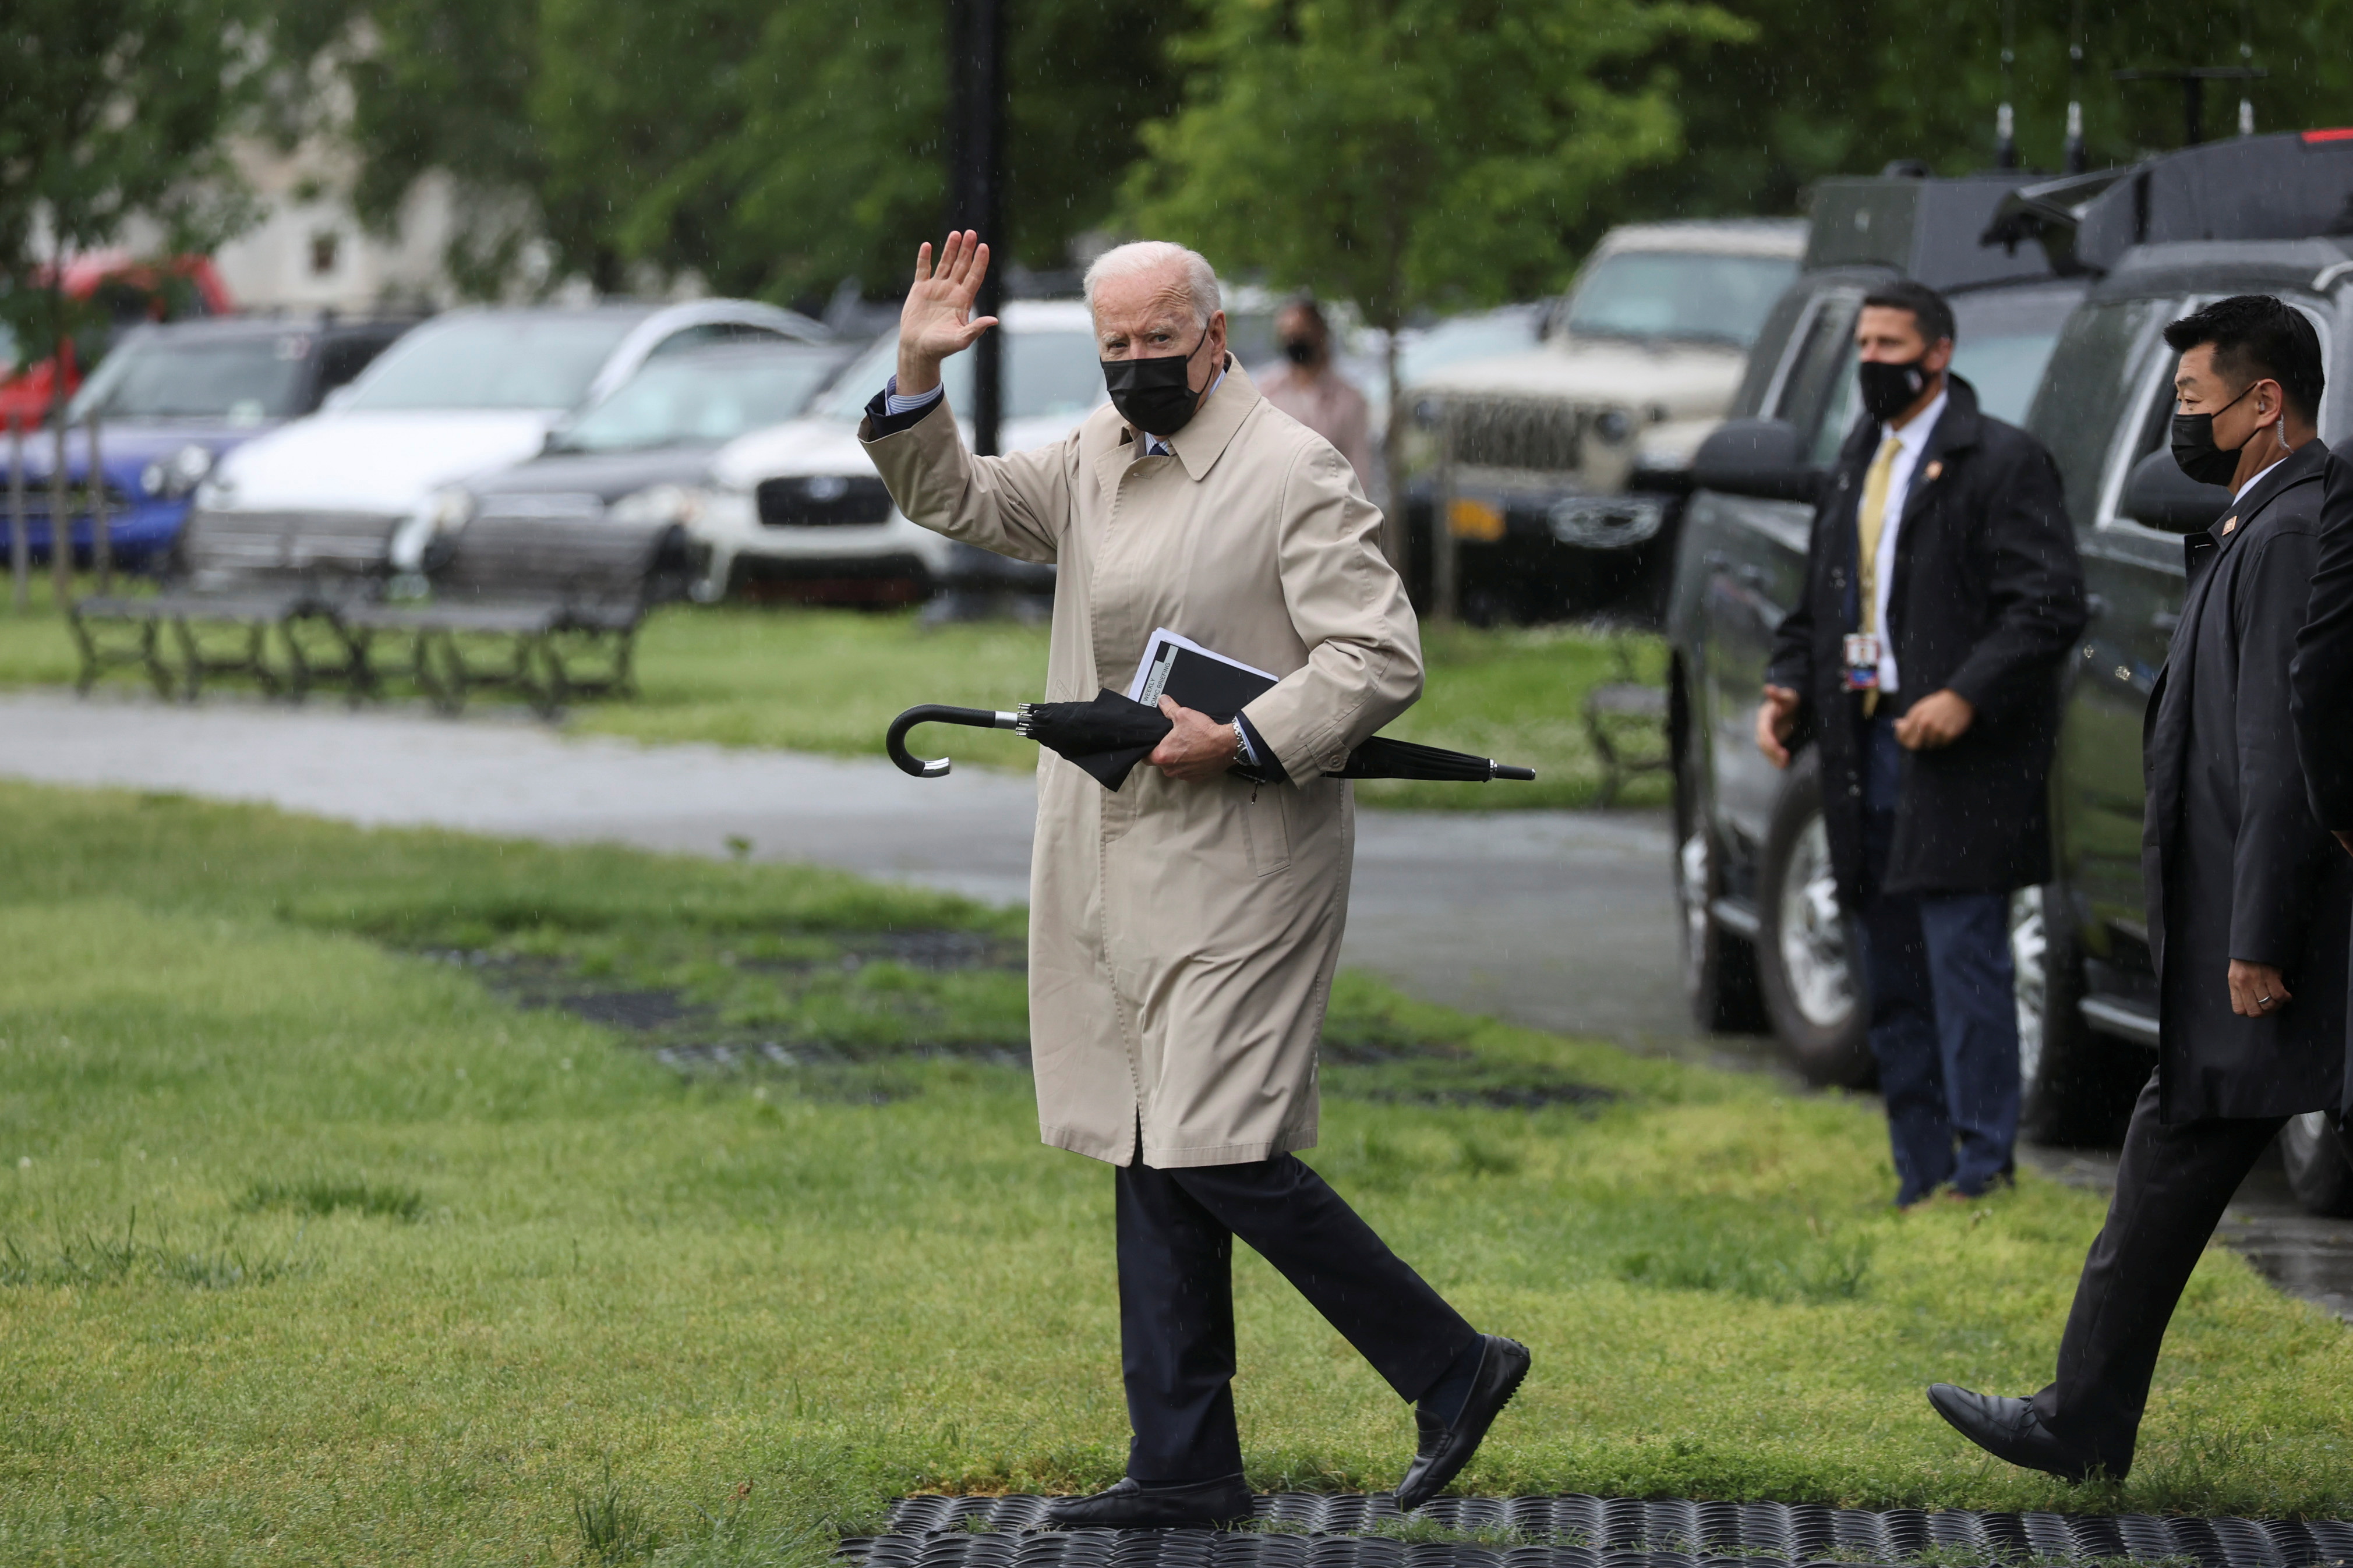 U.S. President Joe Biden waves before boarding the Marine One helicopter for a planned weekend at Camp David, from the Ellipse at the White House in Washington, U.S., May 7, 2021.  REUTERS/Jonathan Ernst